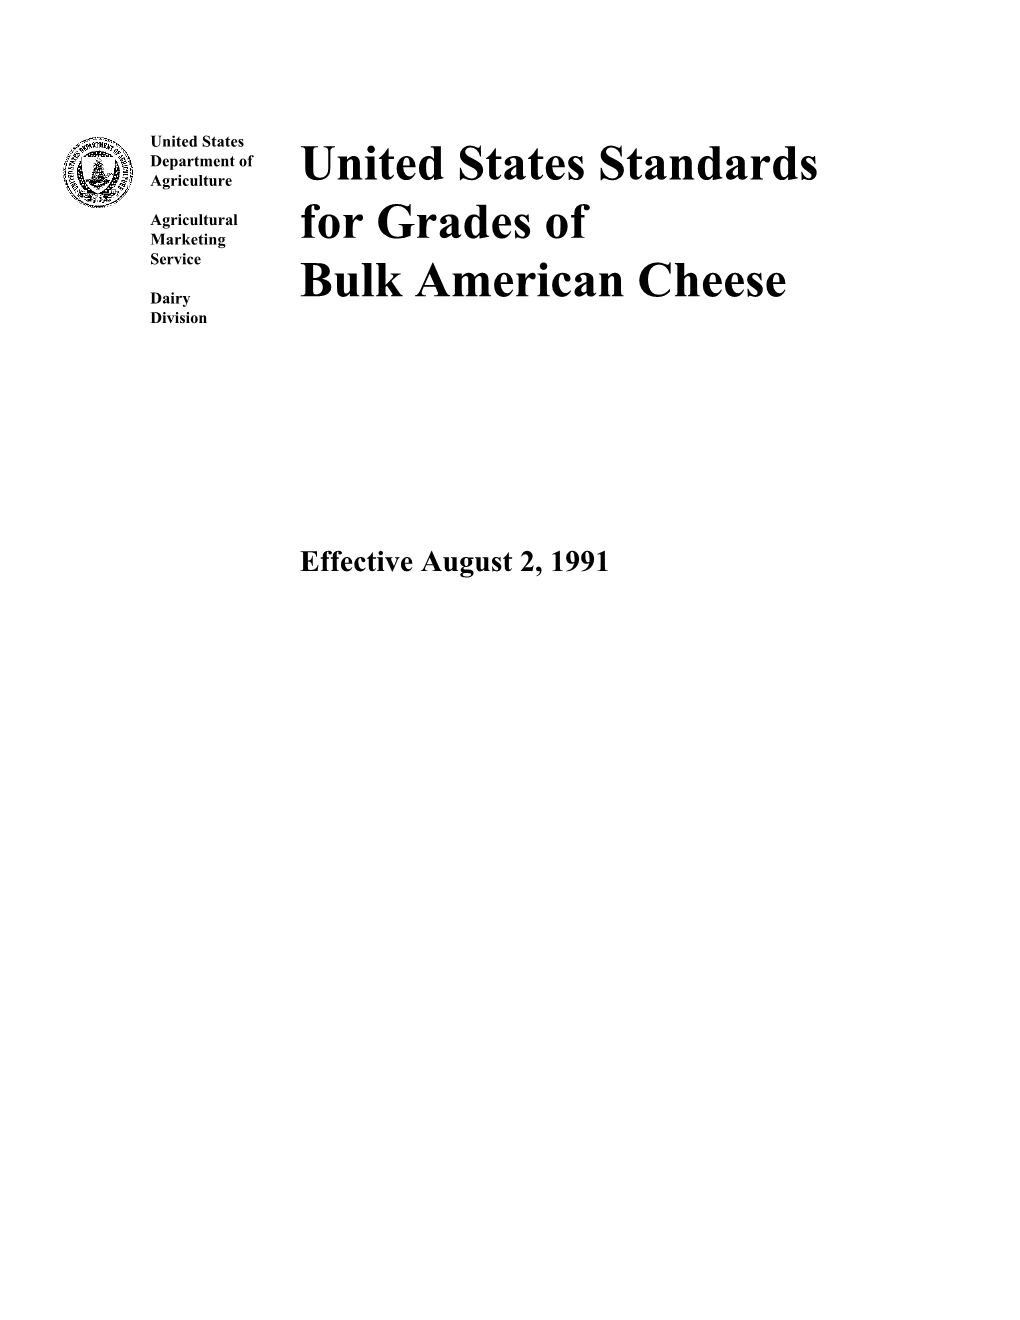 U.S. Standards for Grades of Bulk American Cheese